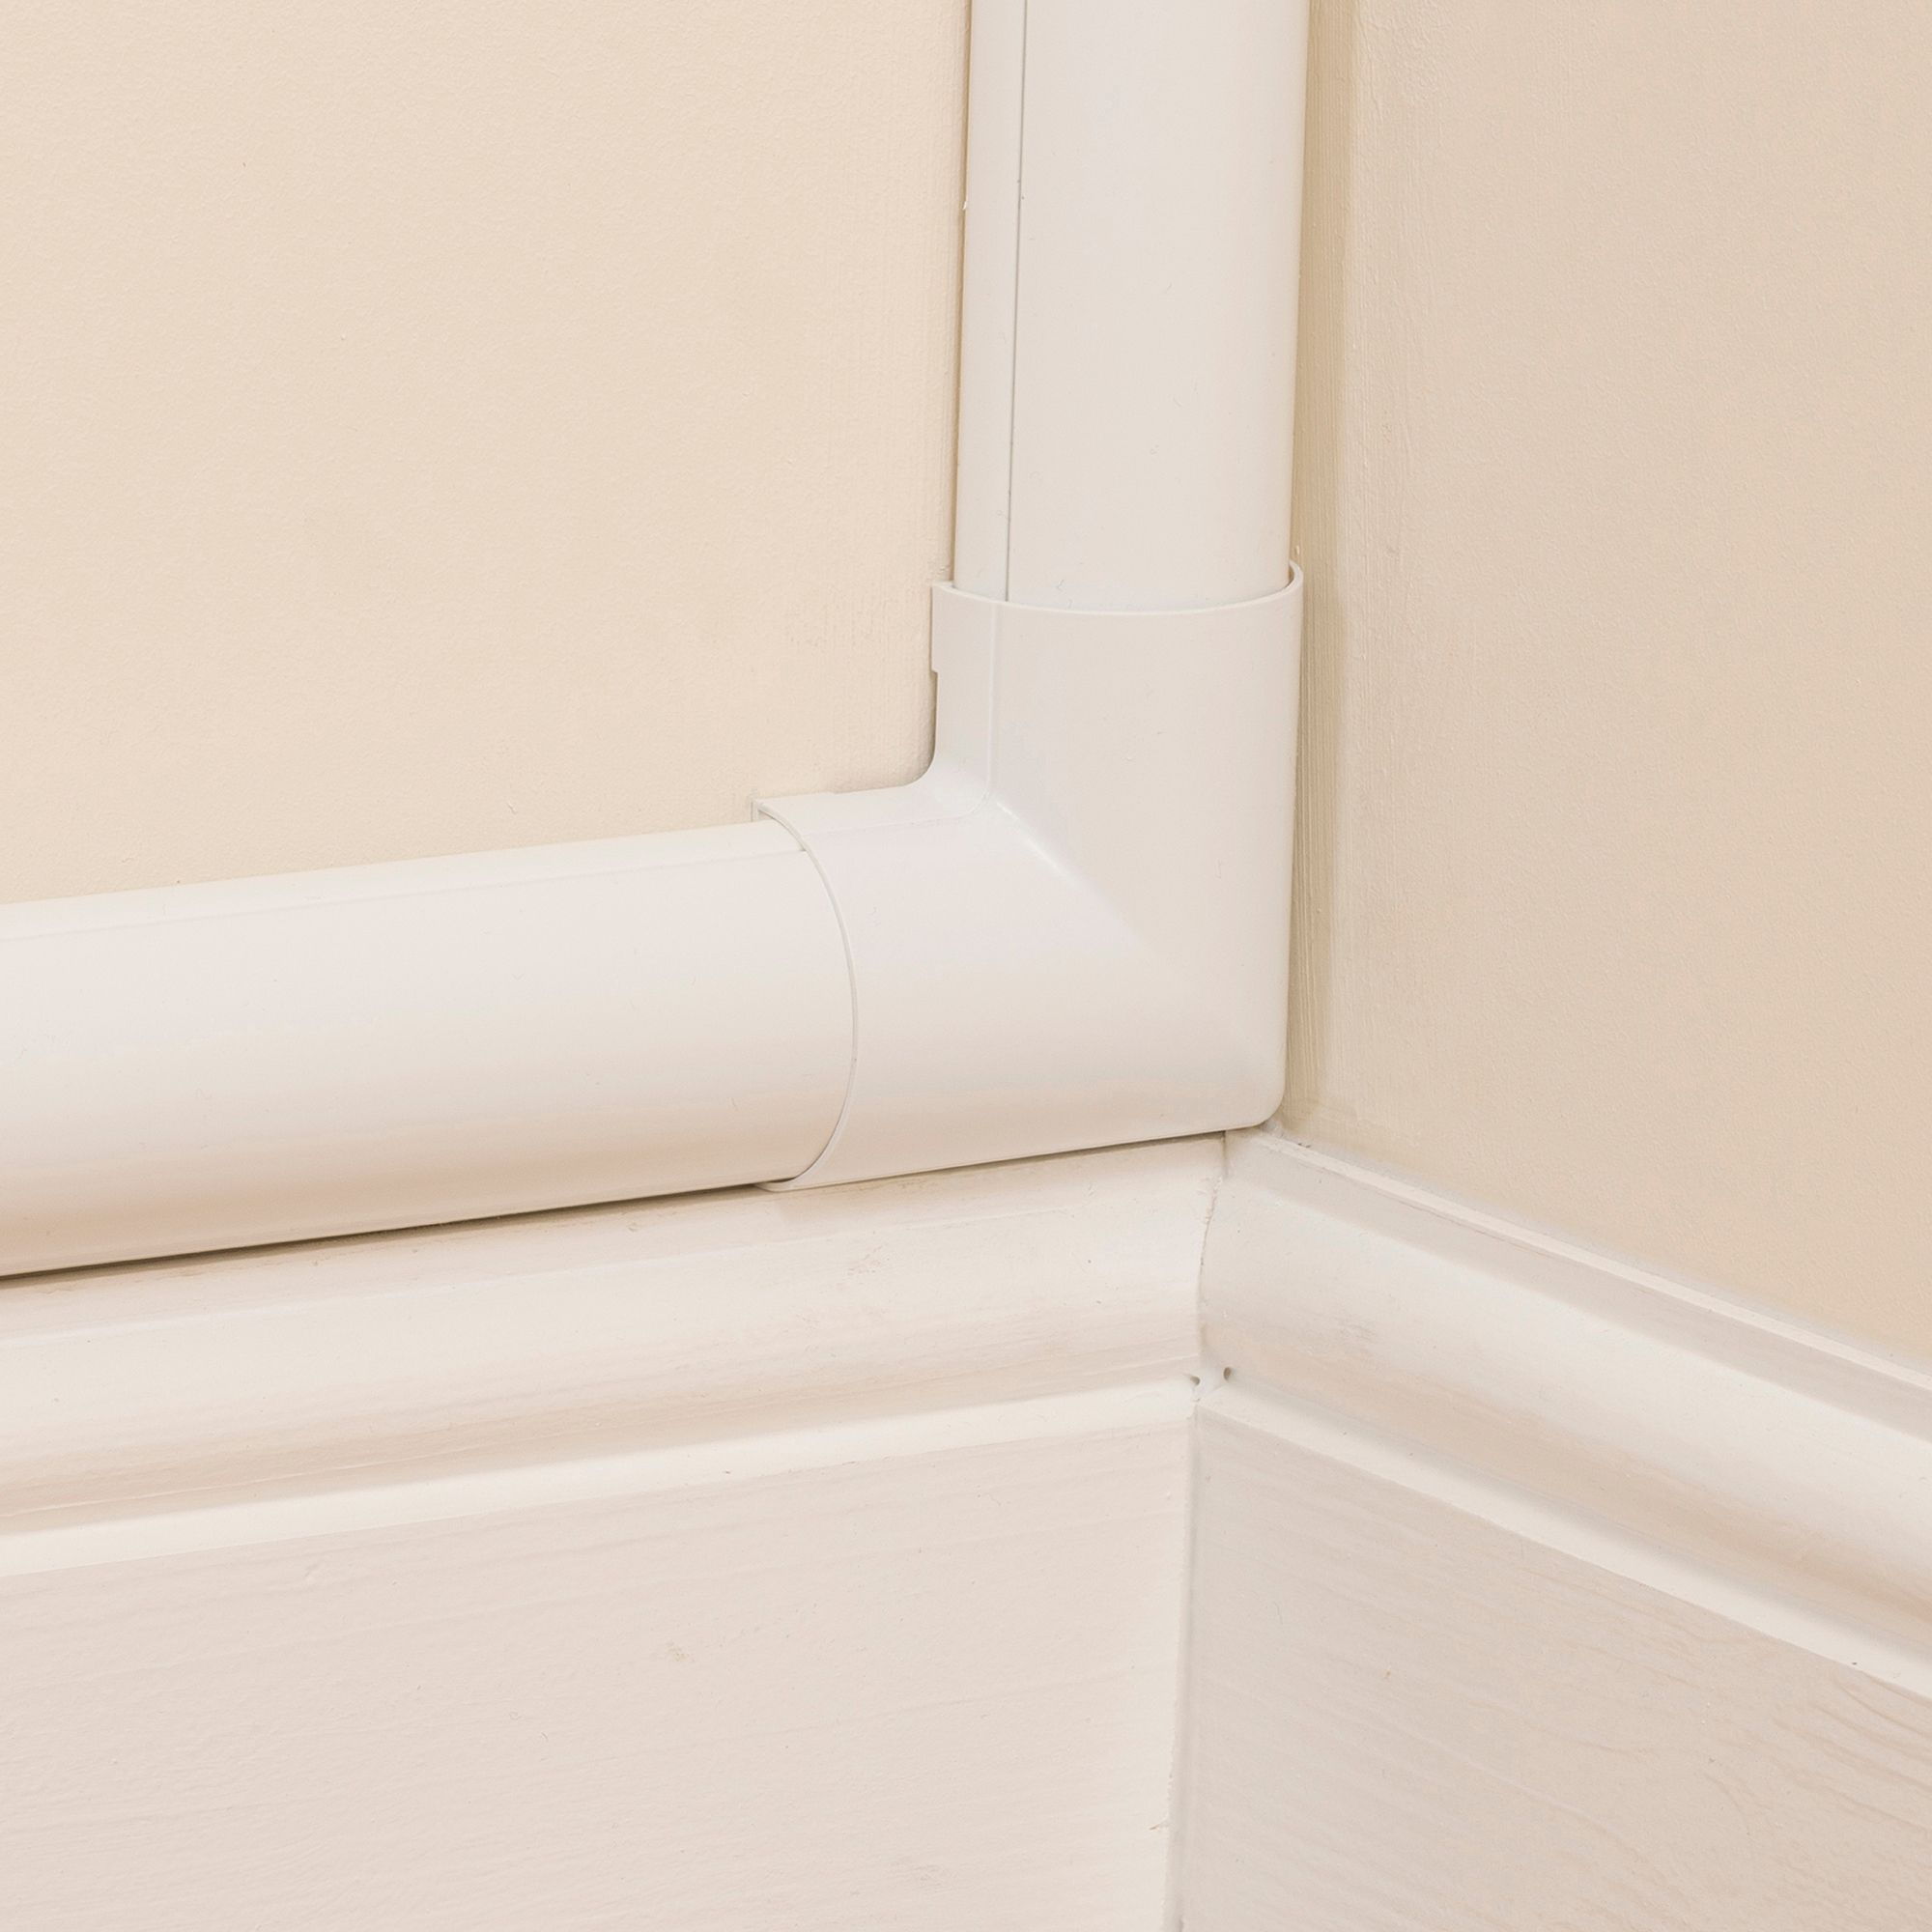 D-Line White 50mm x Flat 25° Trunking angle, Pack of 2